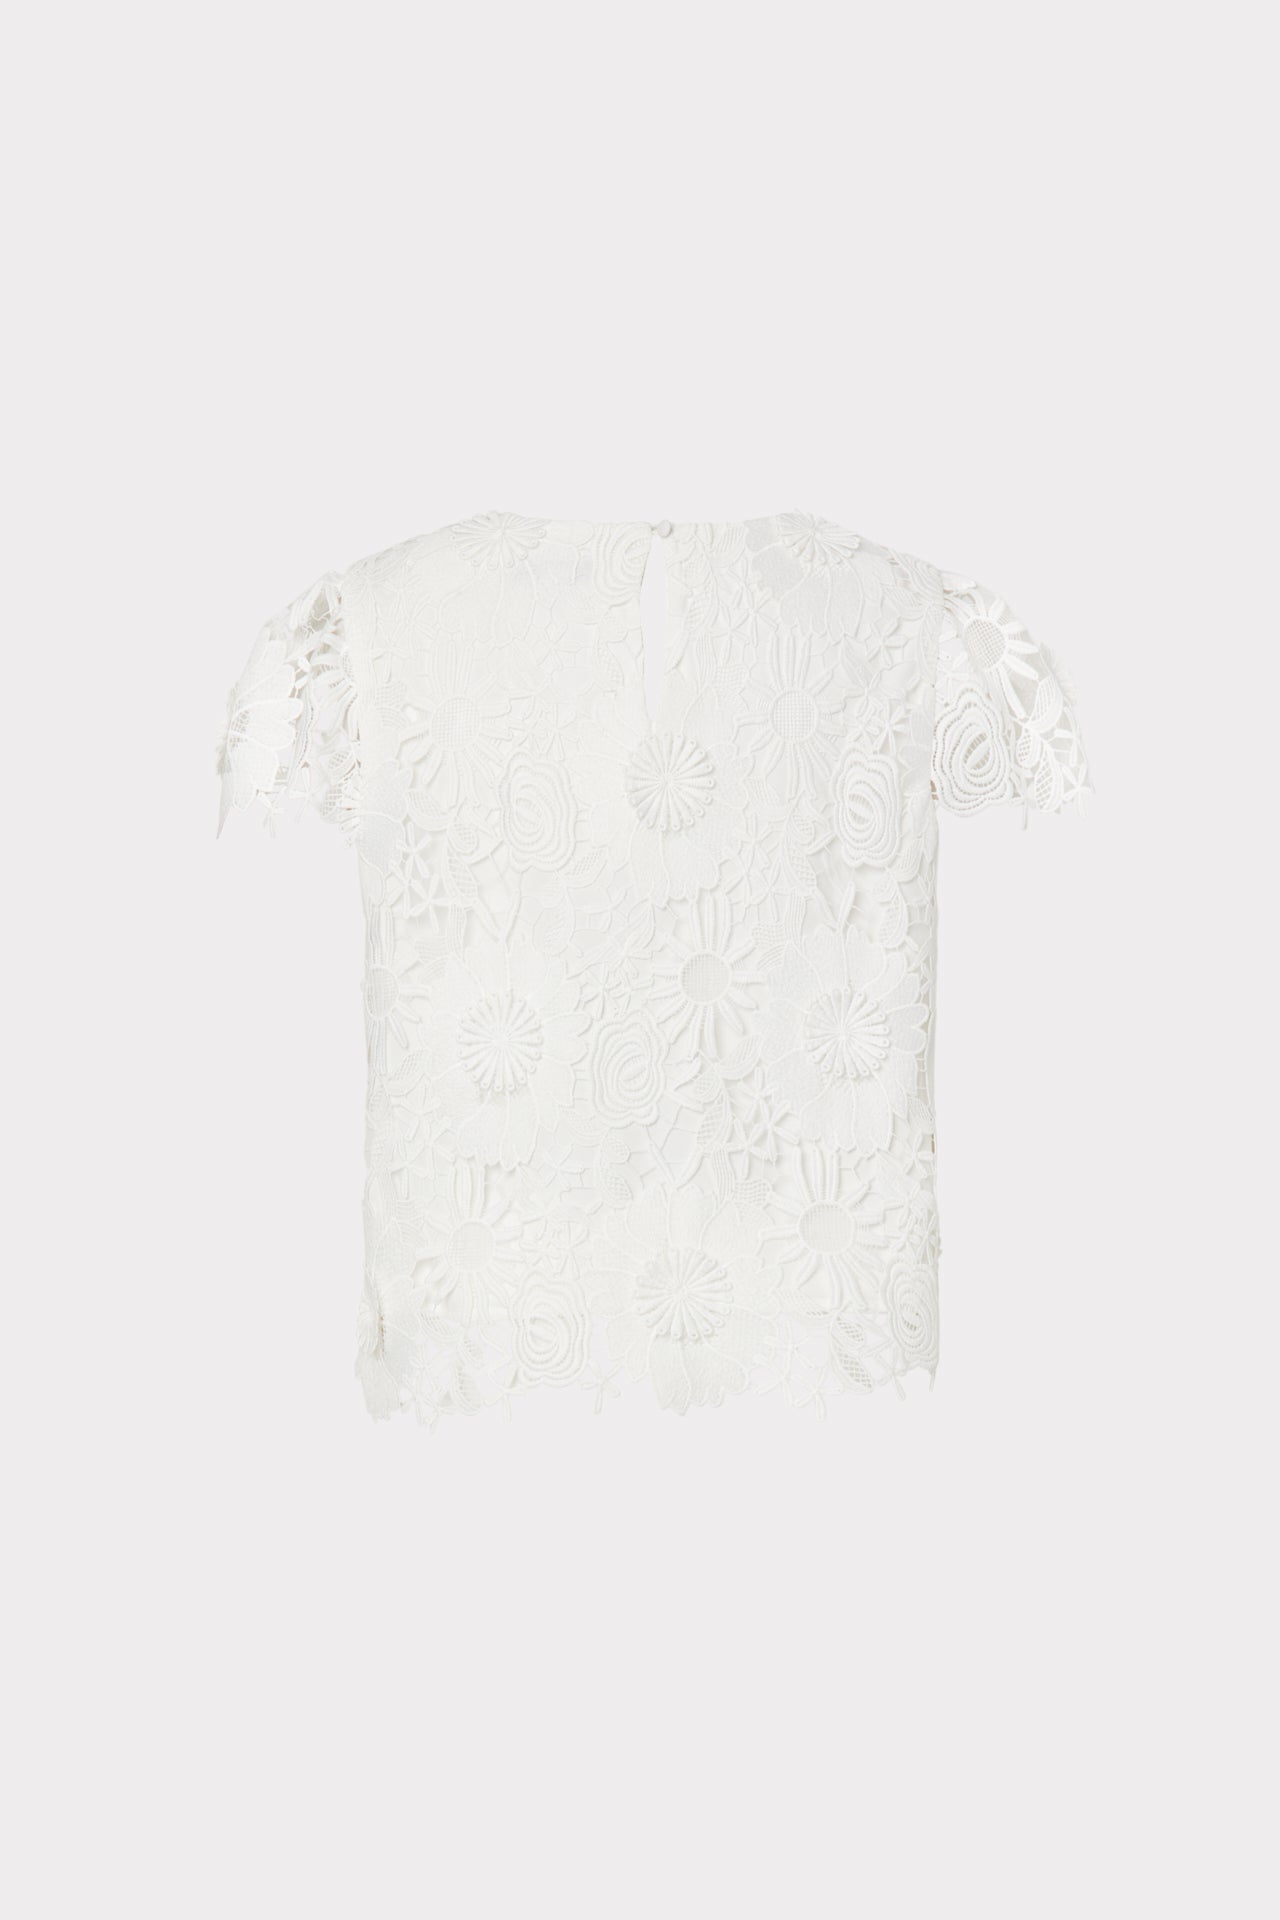 3D Lace Baby Tee